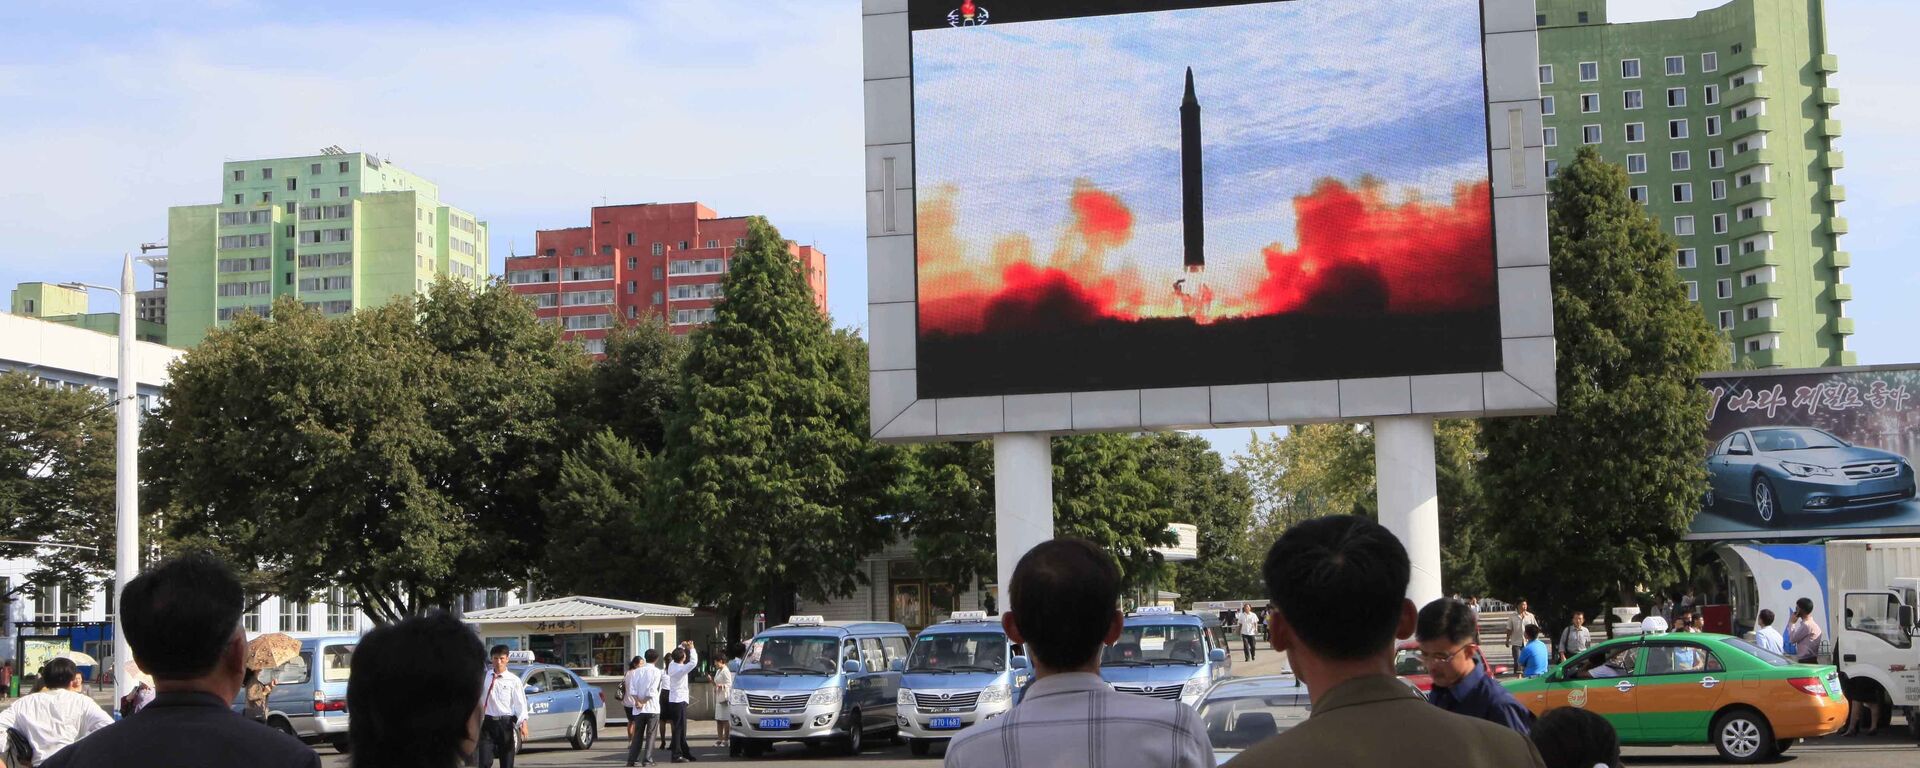 People watch a launching of a Hwasong-12 strategic ballistic rocket aired on a public TV screen at the Pyongyang Train Station in Pyongyang, North Korea, Saturday, Sept. 16, 2017 - Sputnik International, 1920, 13.07.2023